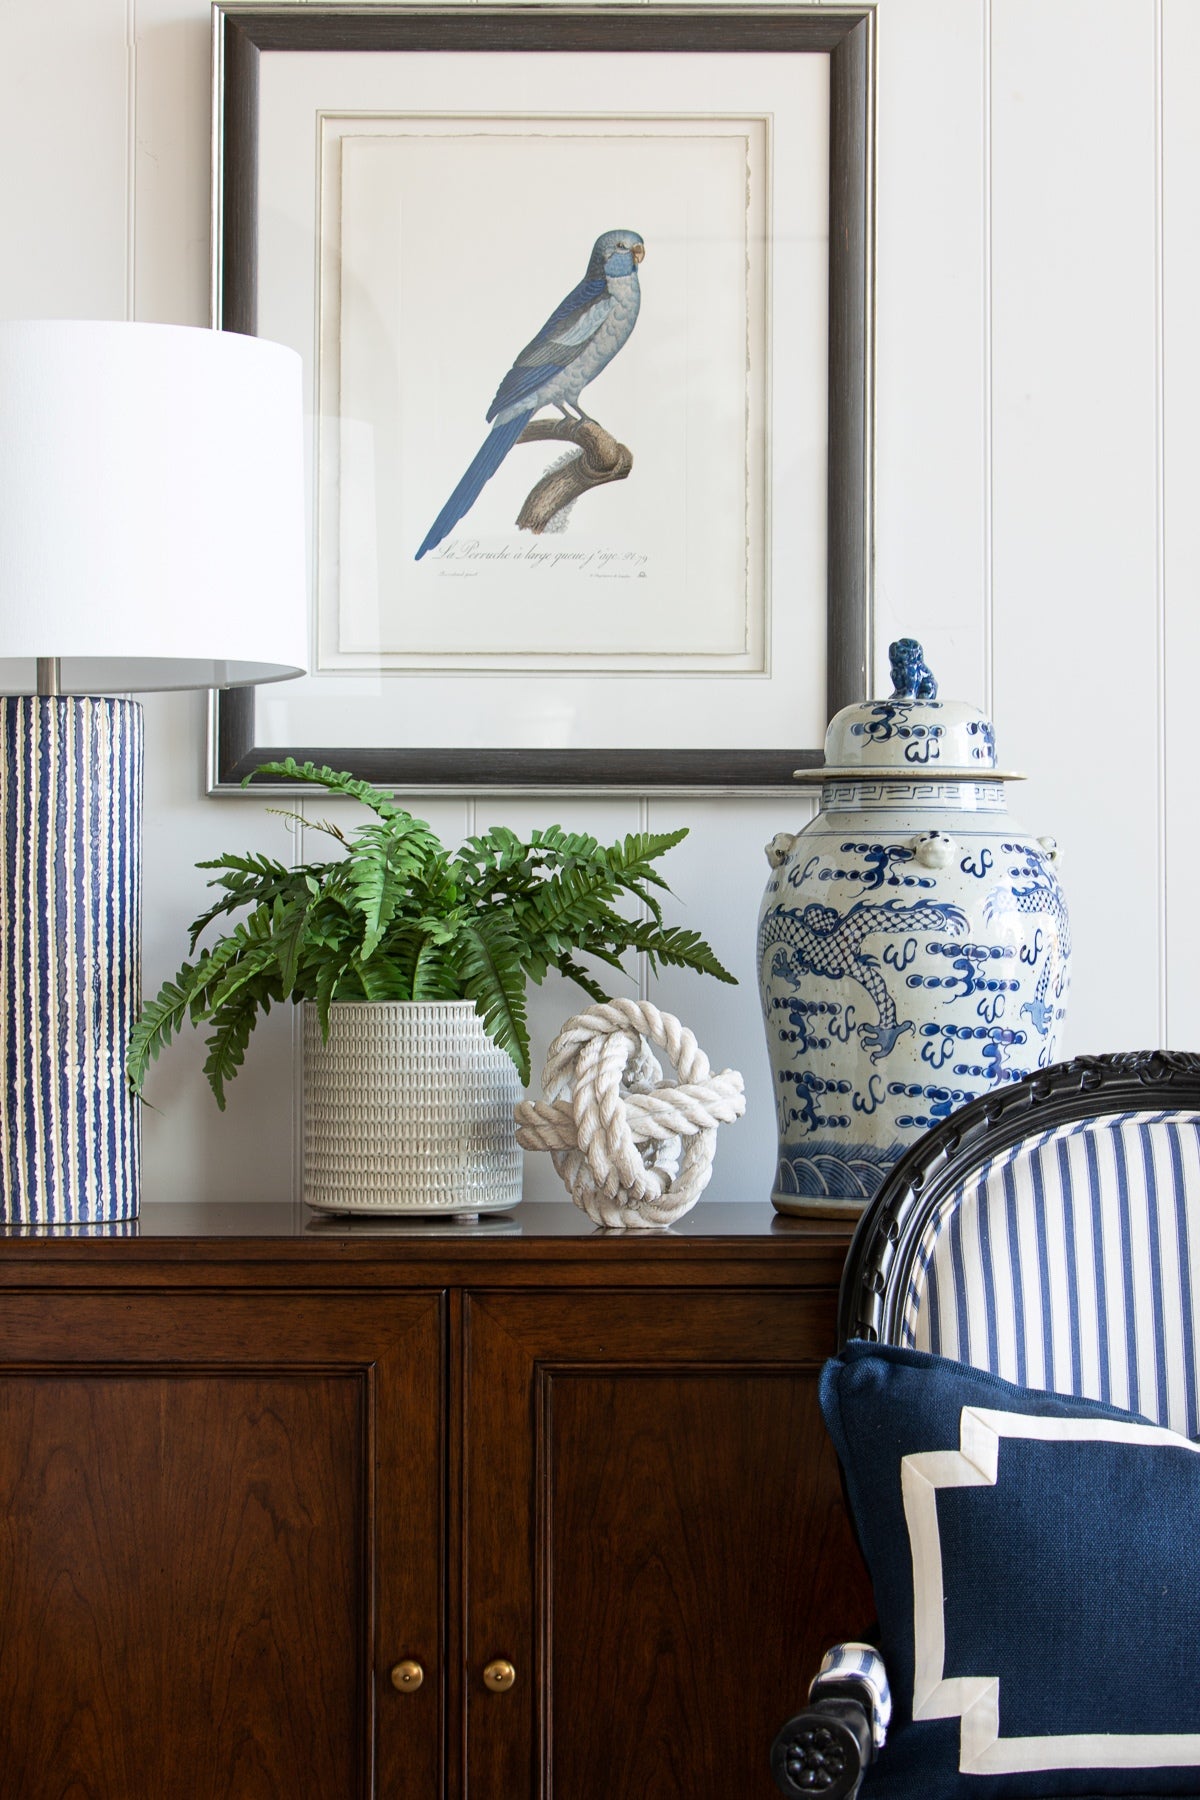 Agatha blue stripe chair featured in living space with a sideboard, lamps, pot plant and artwork